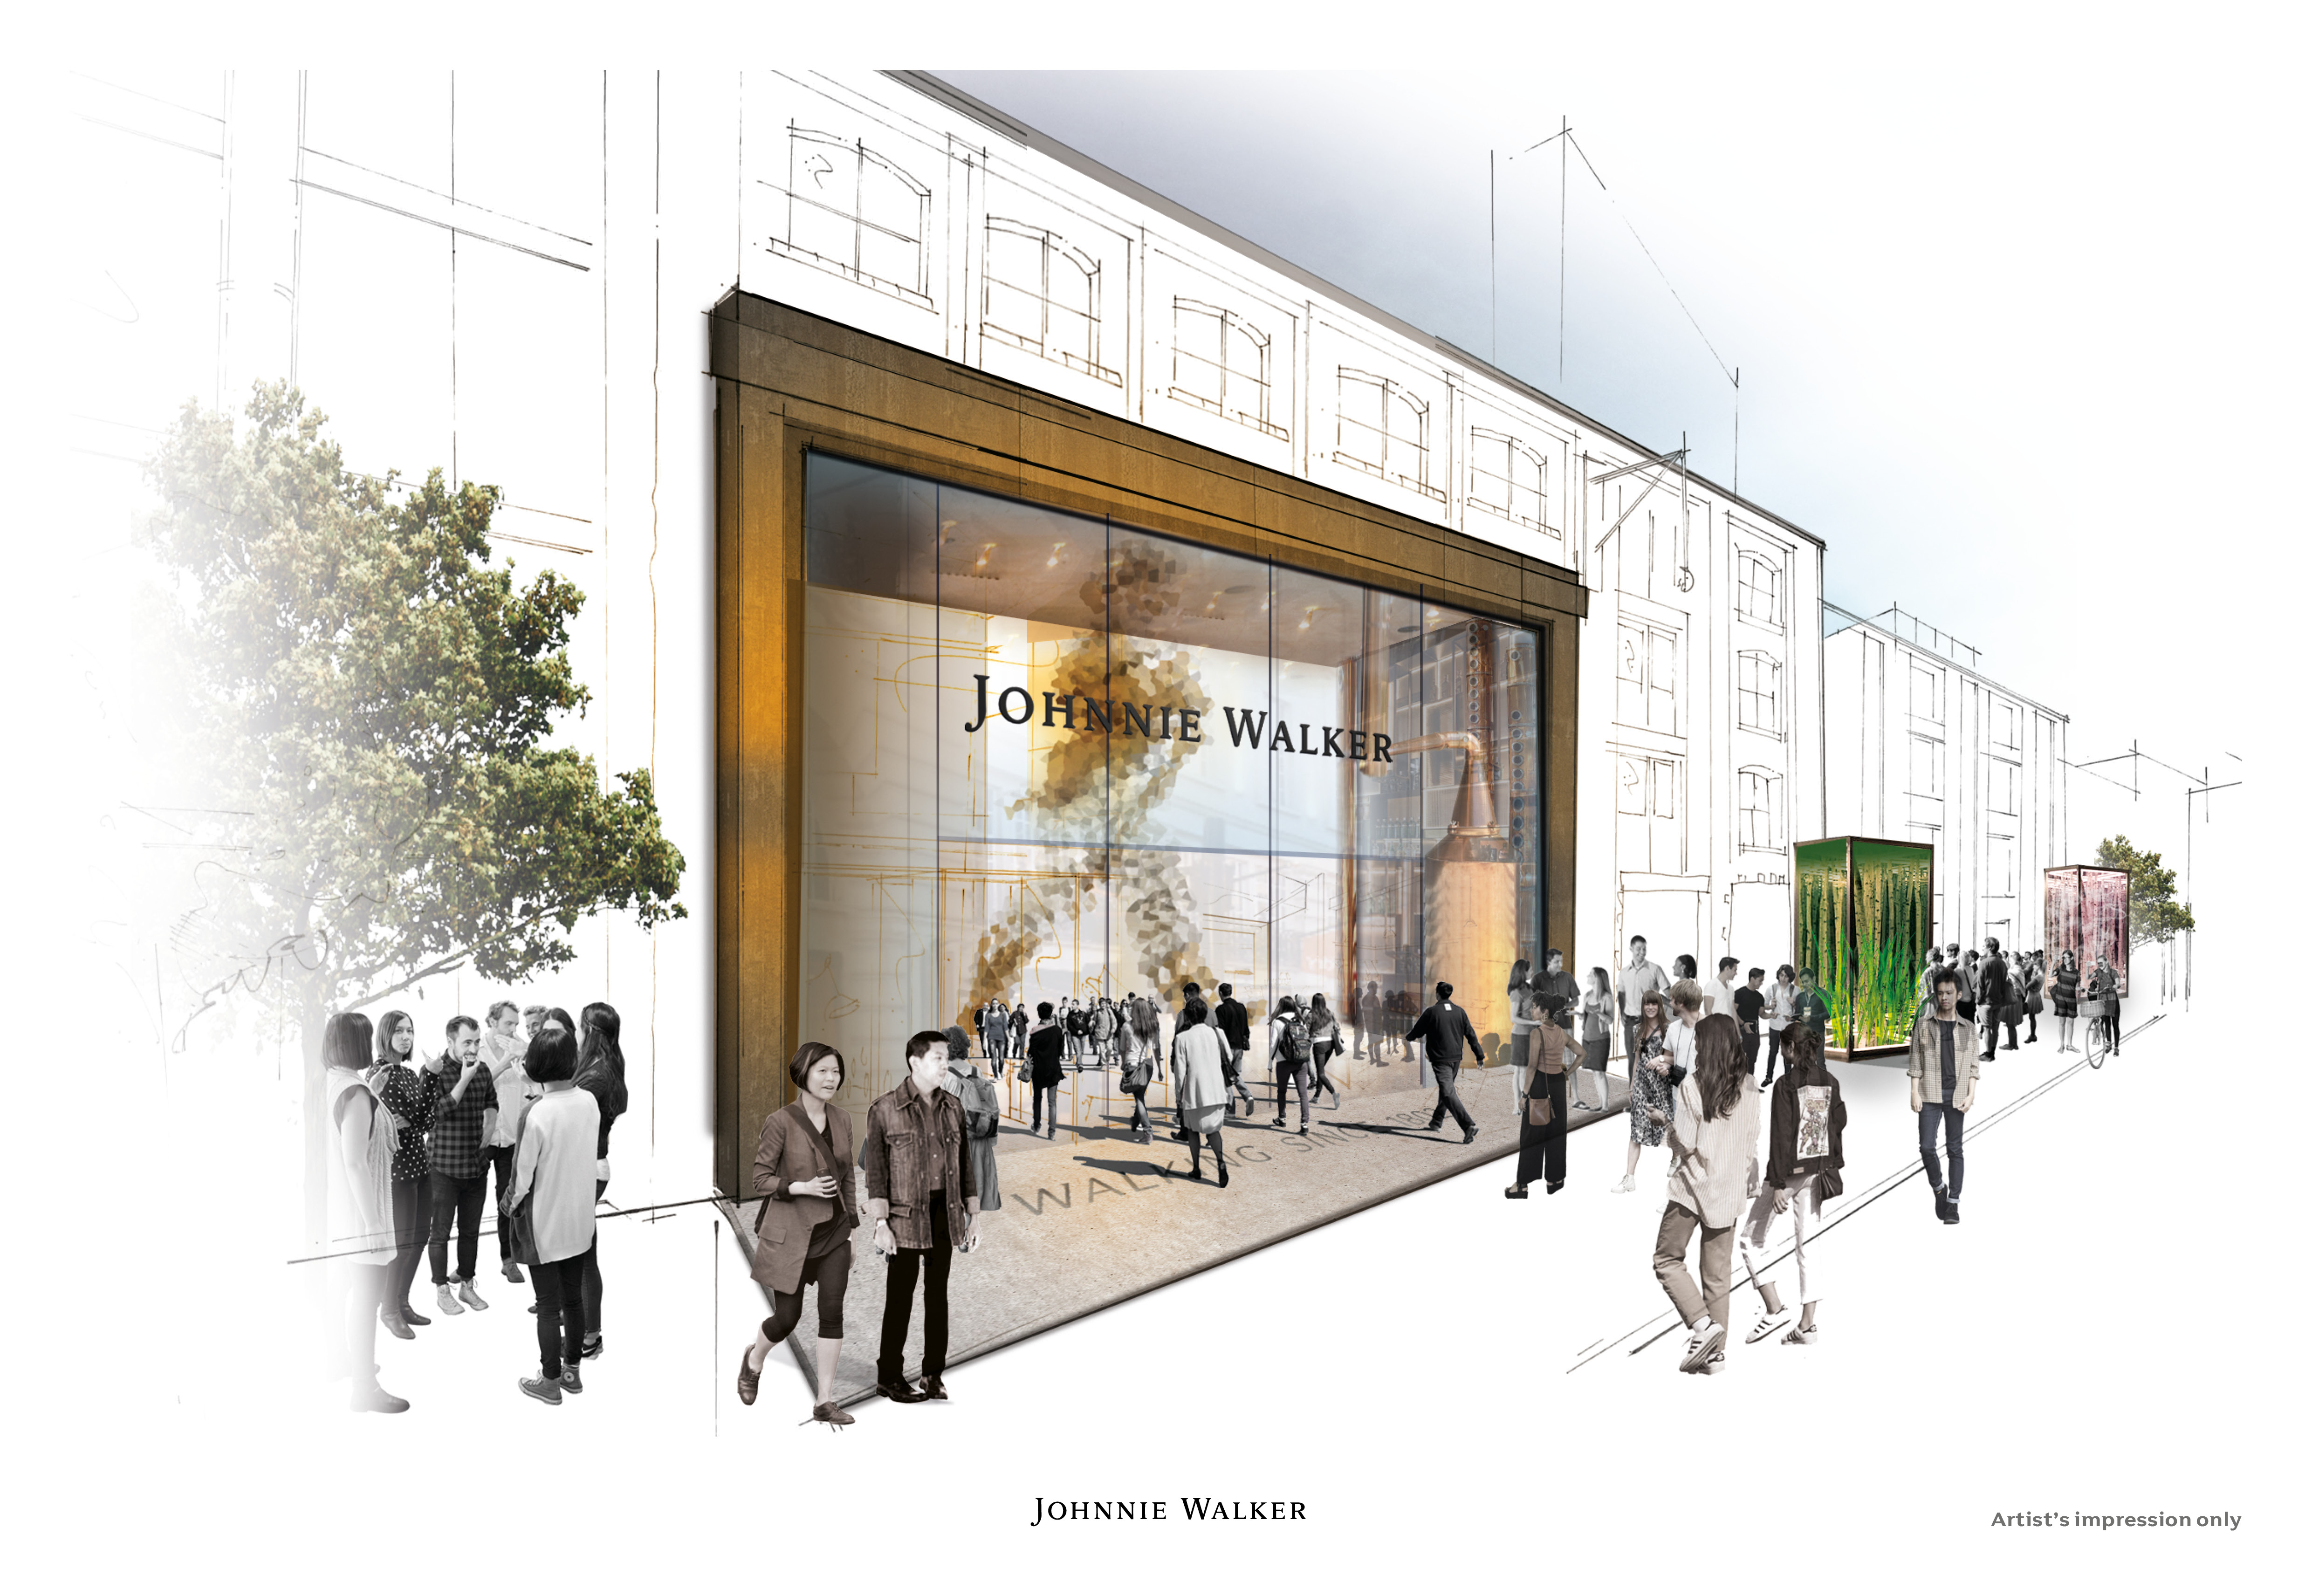 An architect's rendering of the proposed Johnnie Walker visitors' experience to be built in Edinburgh, Scotland. Image courtesy Diageo.